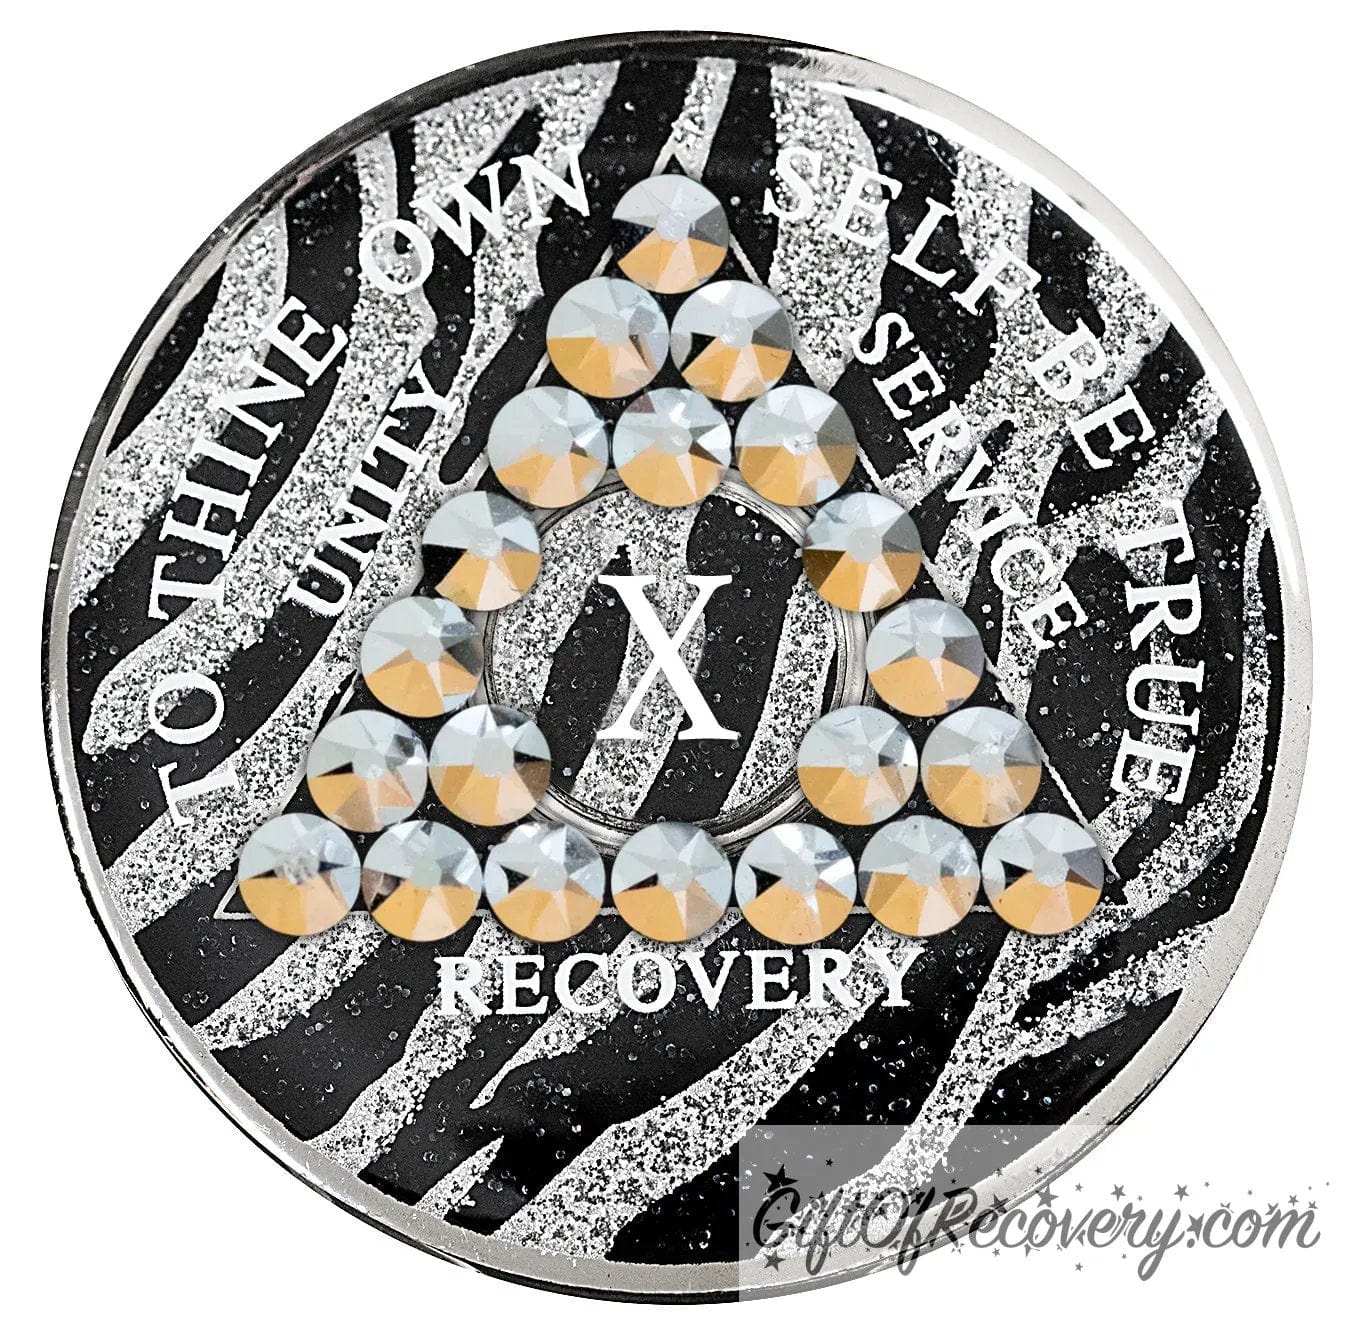 10 Year zebra glitter print, black and silver, AA medallion with 21 genuine comet crystals in a triangle around the year, the lettering unity, service, recovery, the 1 year and To Thine Own Self Be True are in white and the recovery medallion rim is silver.